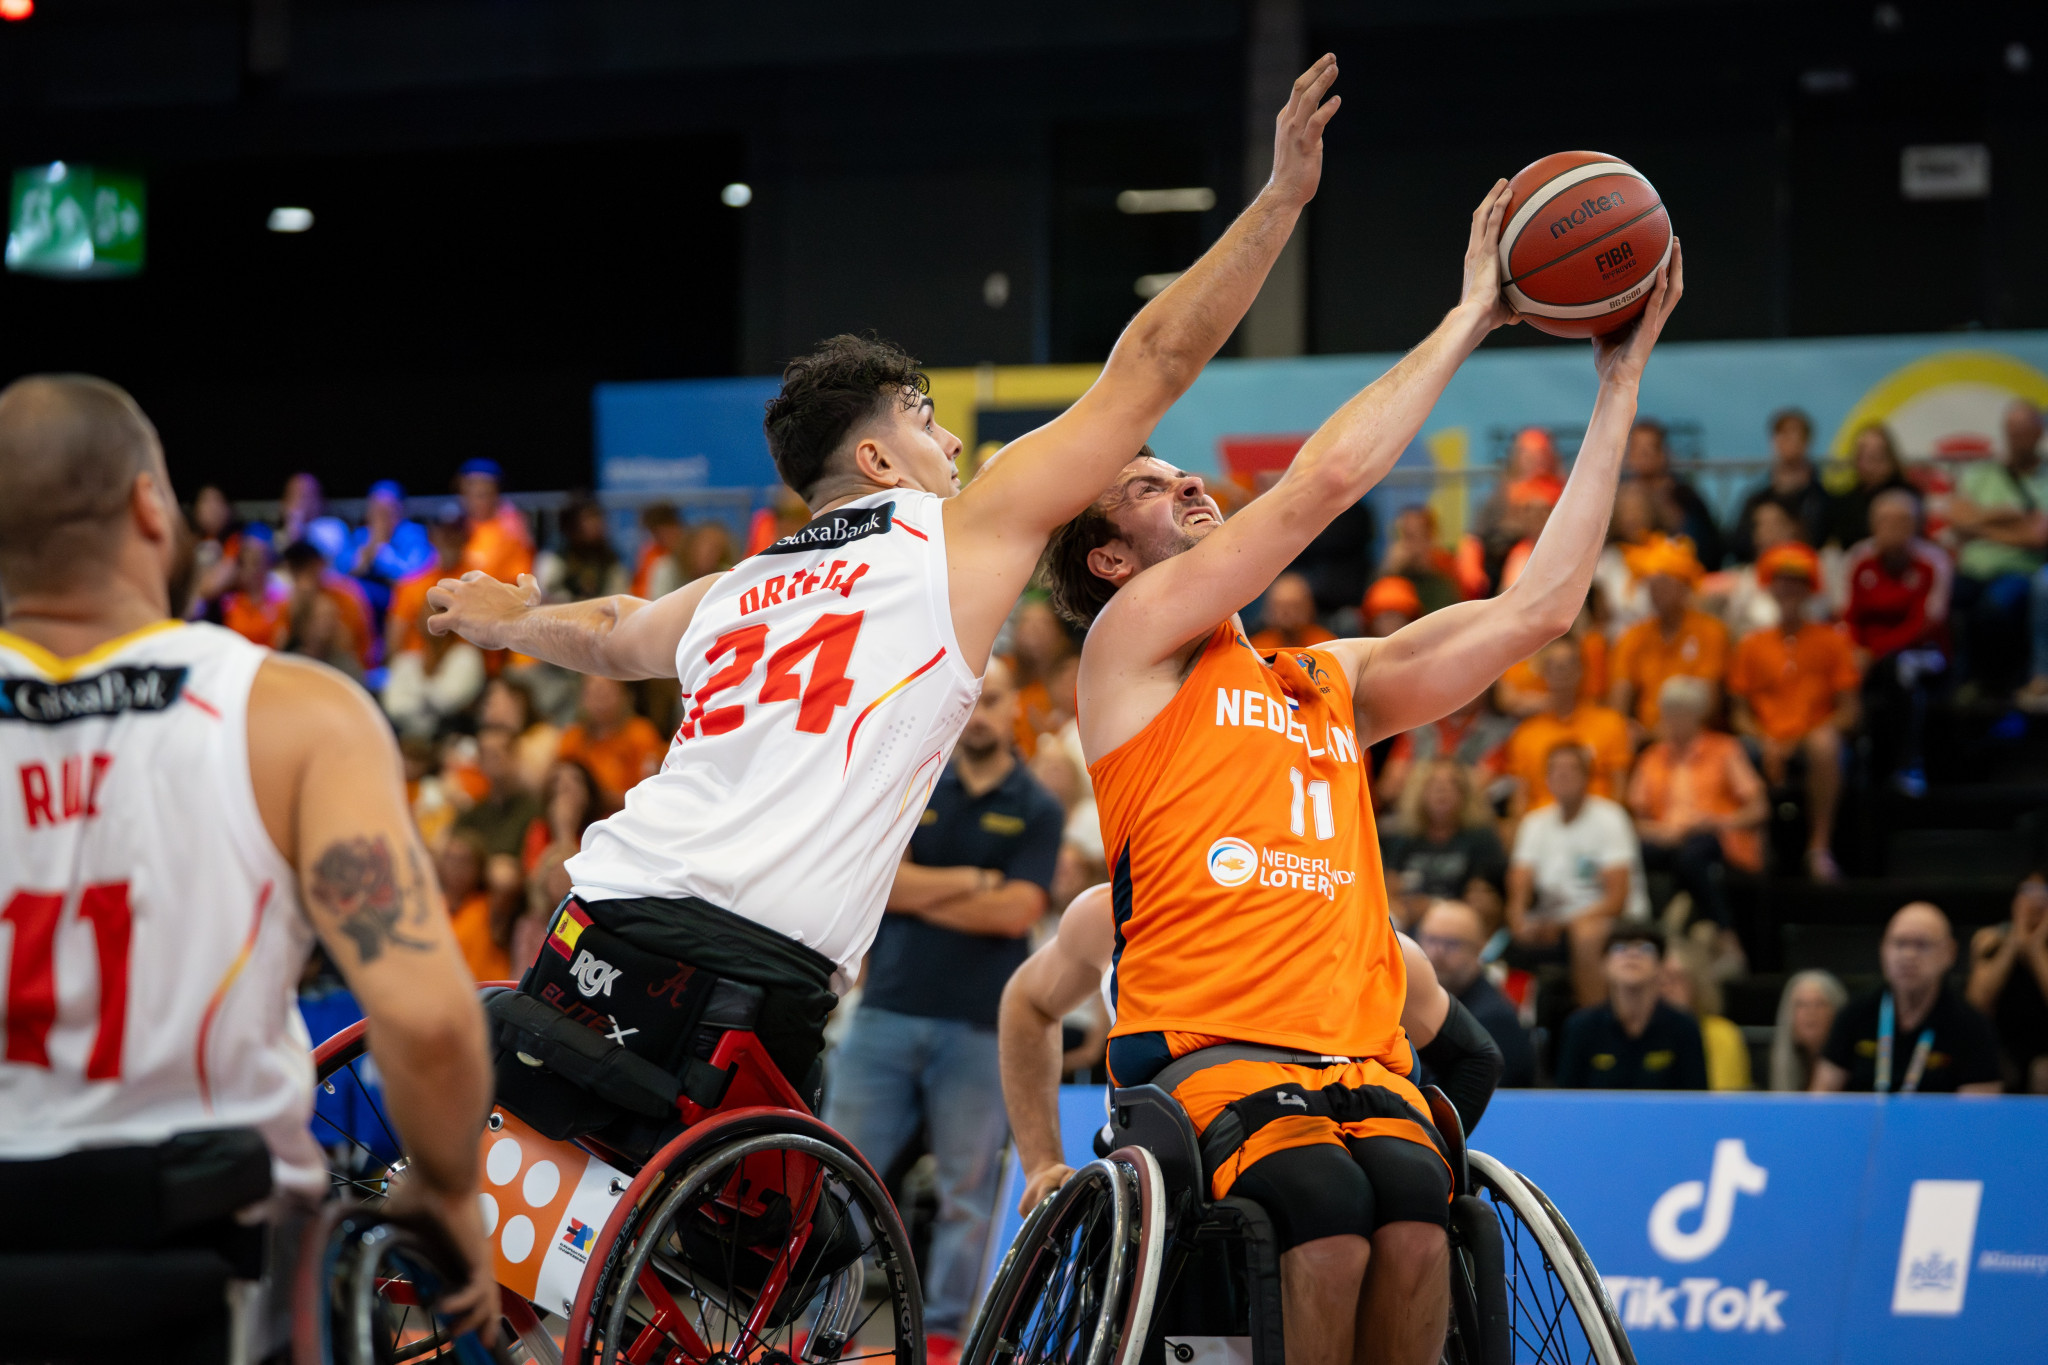 Spain came up just short in a 58-52 defeat to The Netherlands in the men's wheelchair basketball competition ©EPC